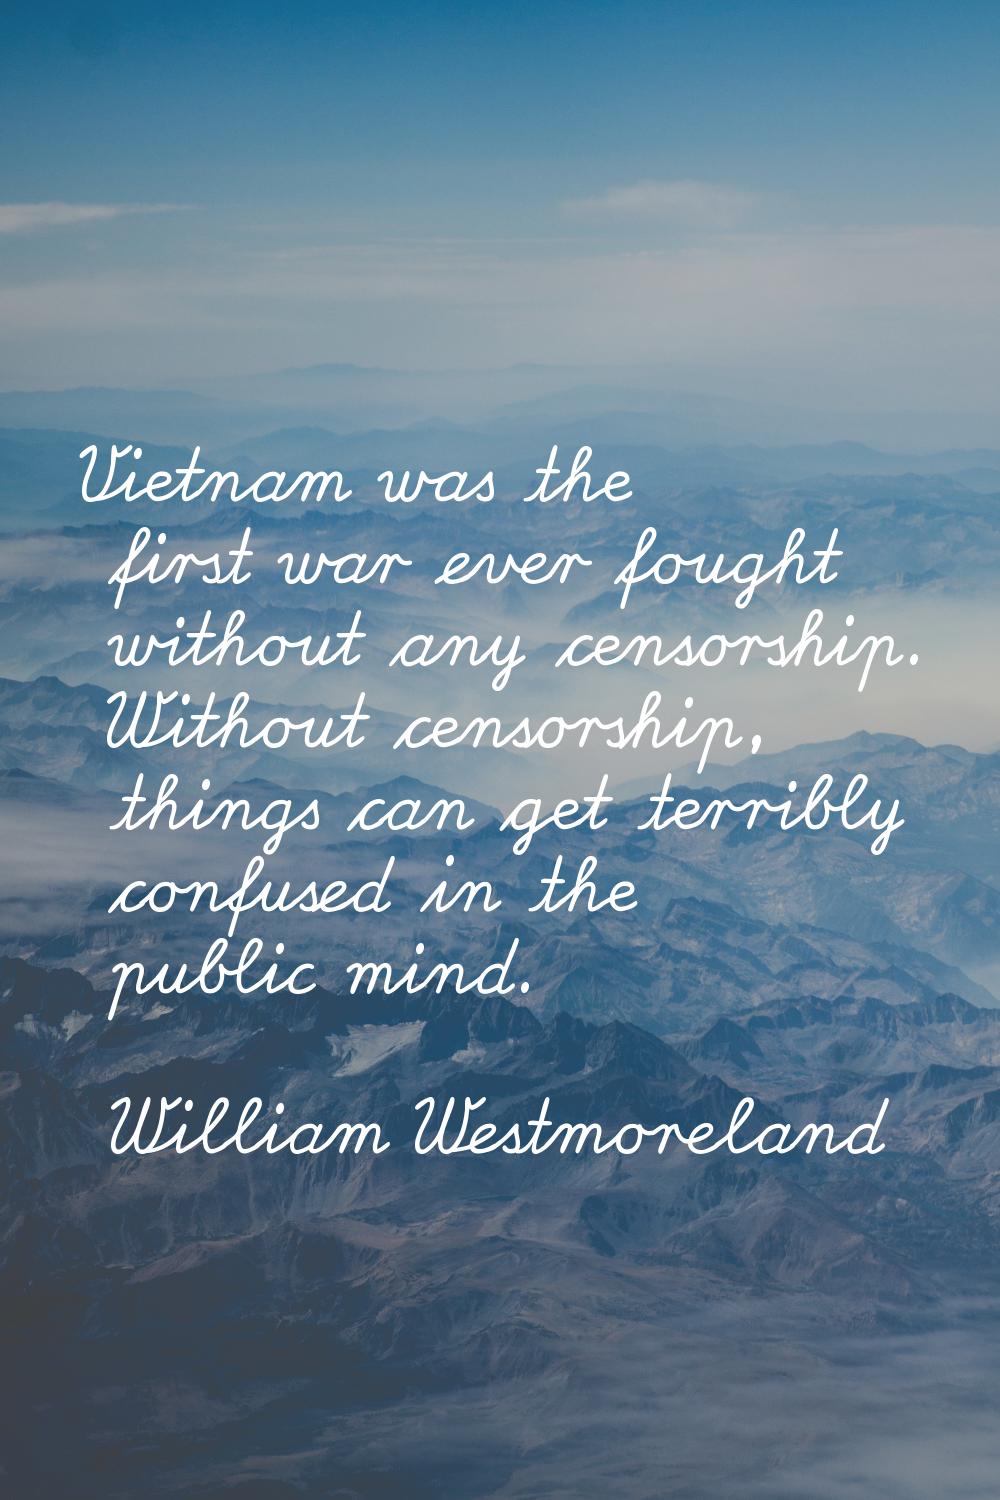 Vietnam was the first war ever fought without any censorship. Without censorship, things can get te